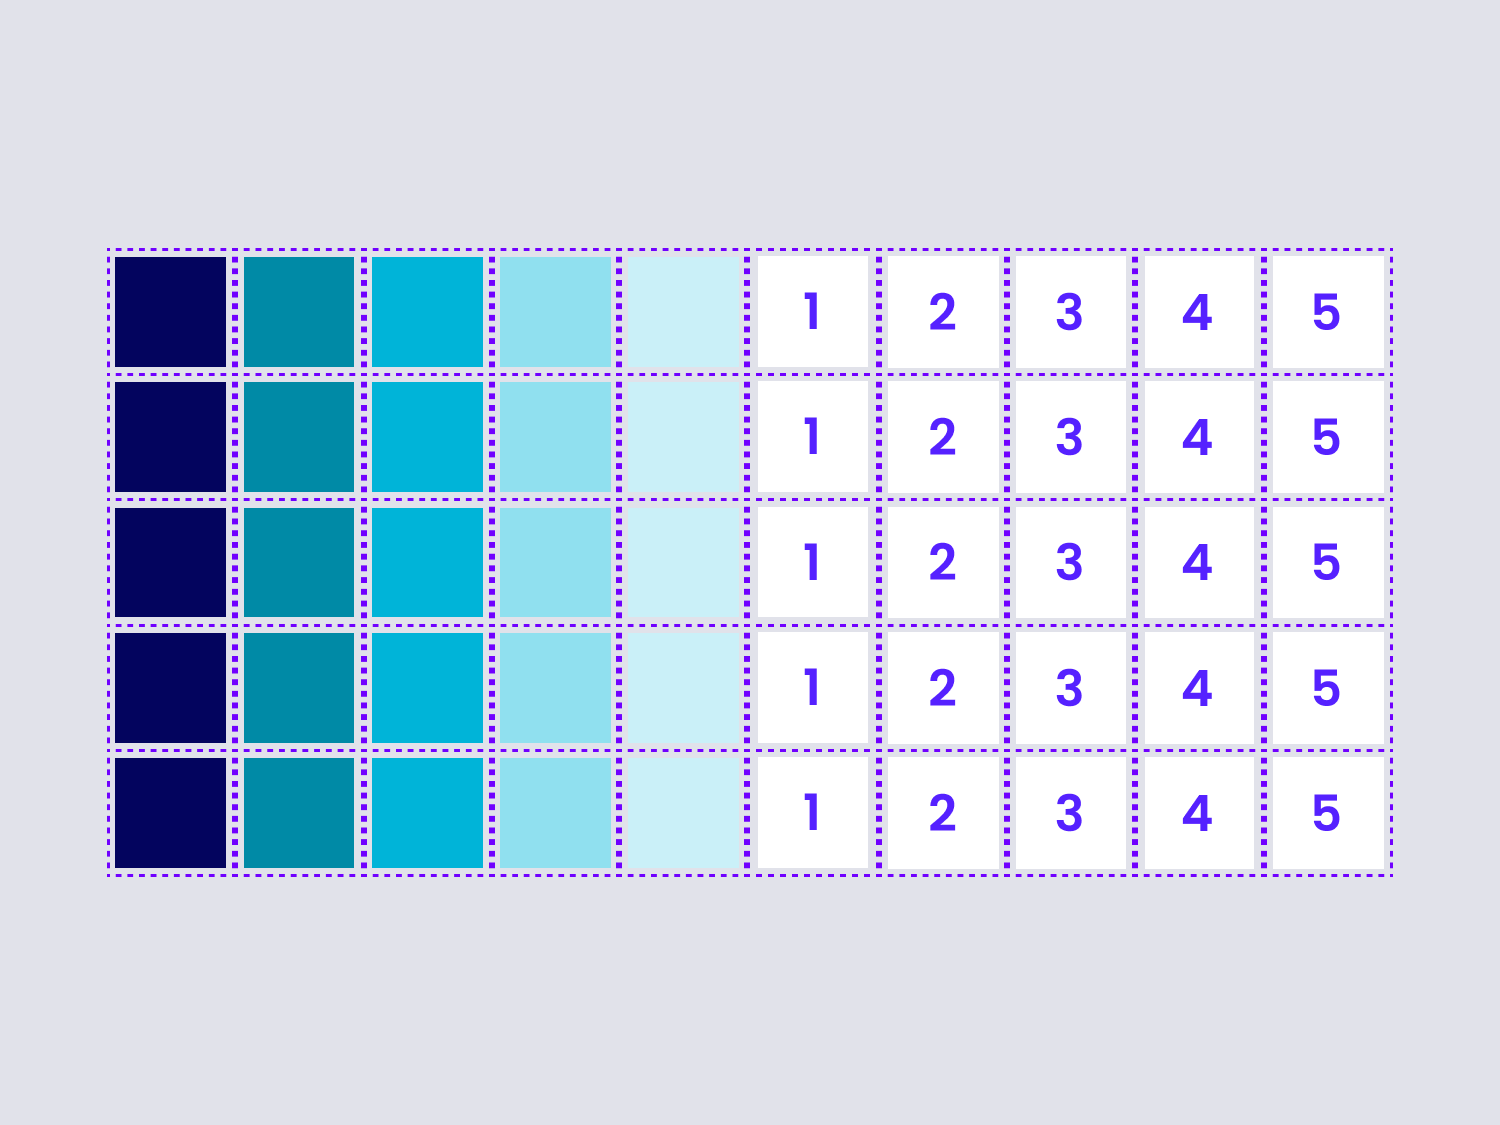 a table that illustrates PNG filters by showing a grid with colored pixels and a numerical value assigned to each one of them